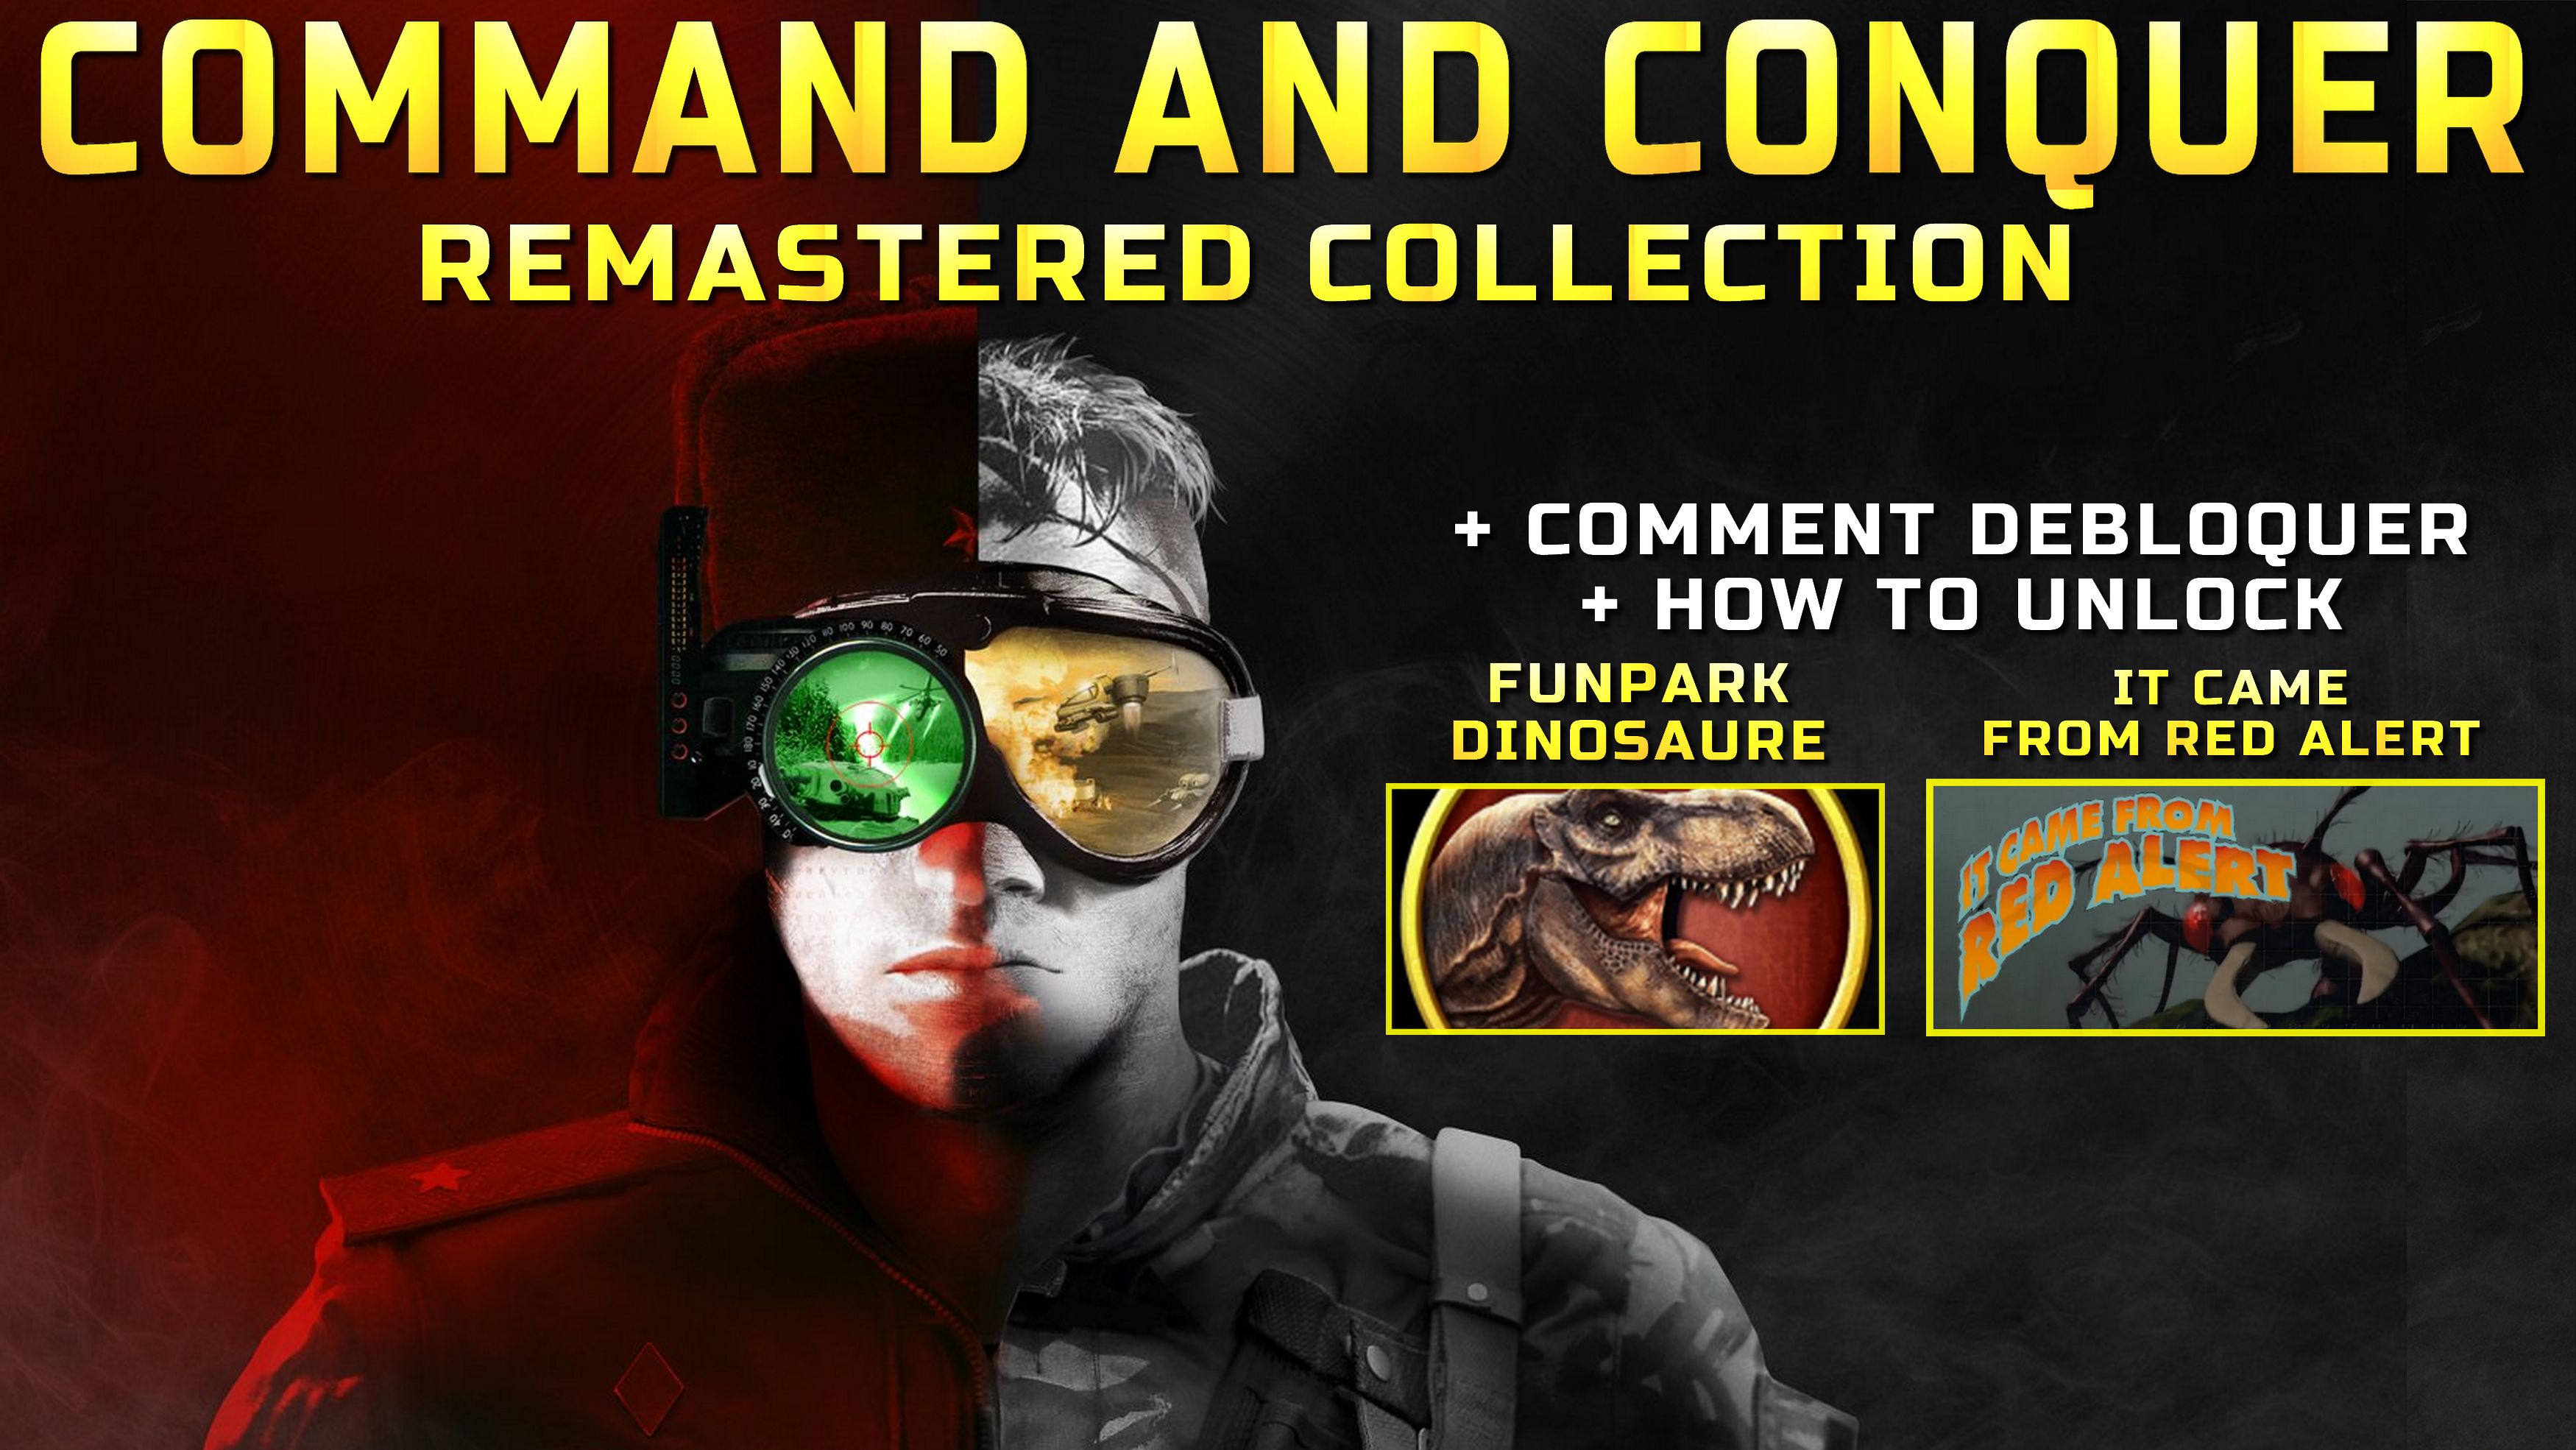 Command & Conquer Remastered collection. Читы на Command and Conquer Remastered collection. Command & Conquer™ the Ultimate collection. Command & Conquer Remastered collection Origin achiev.